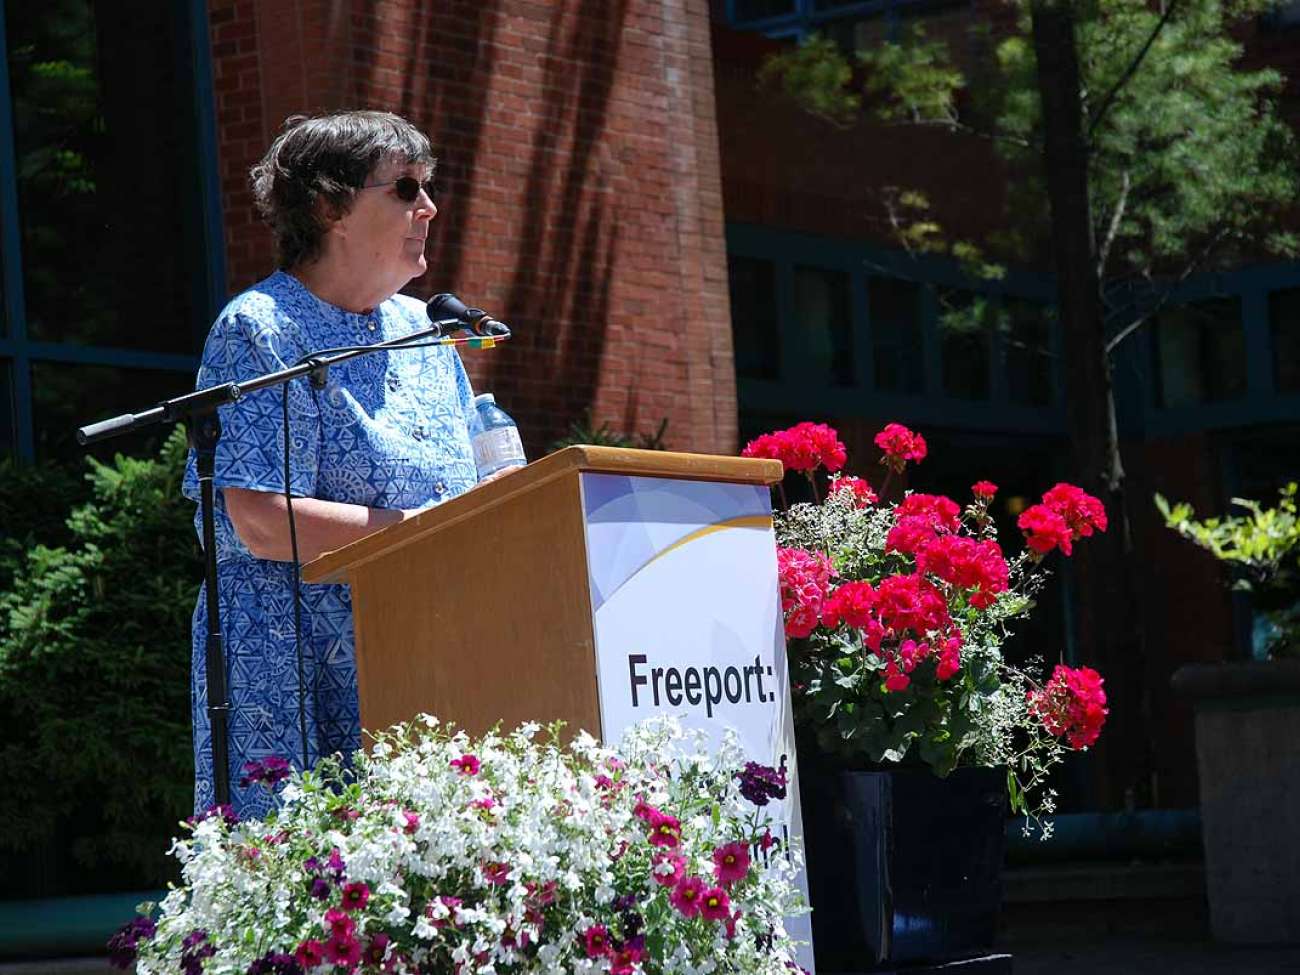 Dr. Anne Crowe summarizing 100 years of care at Freeport.